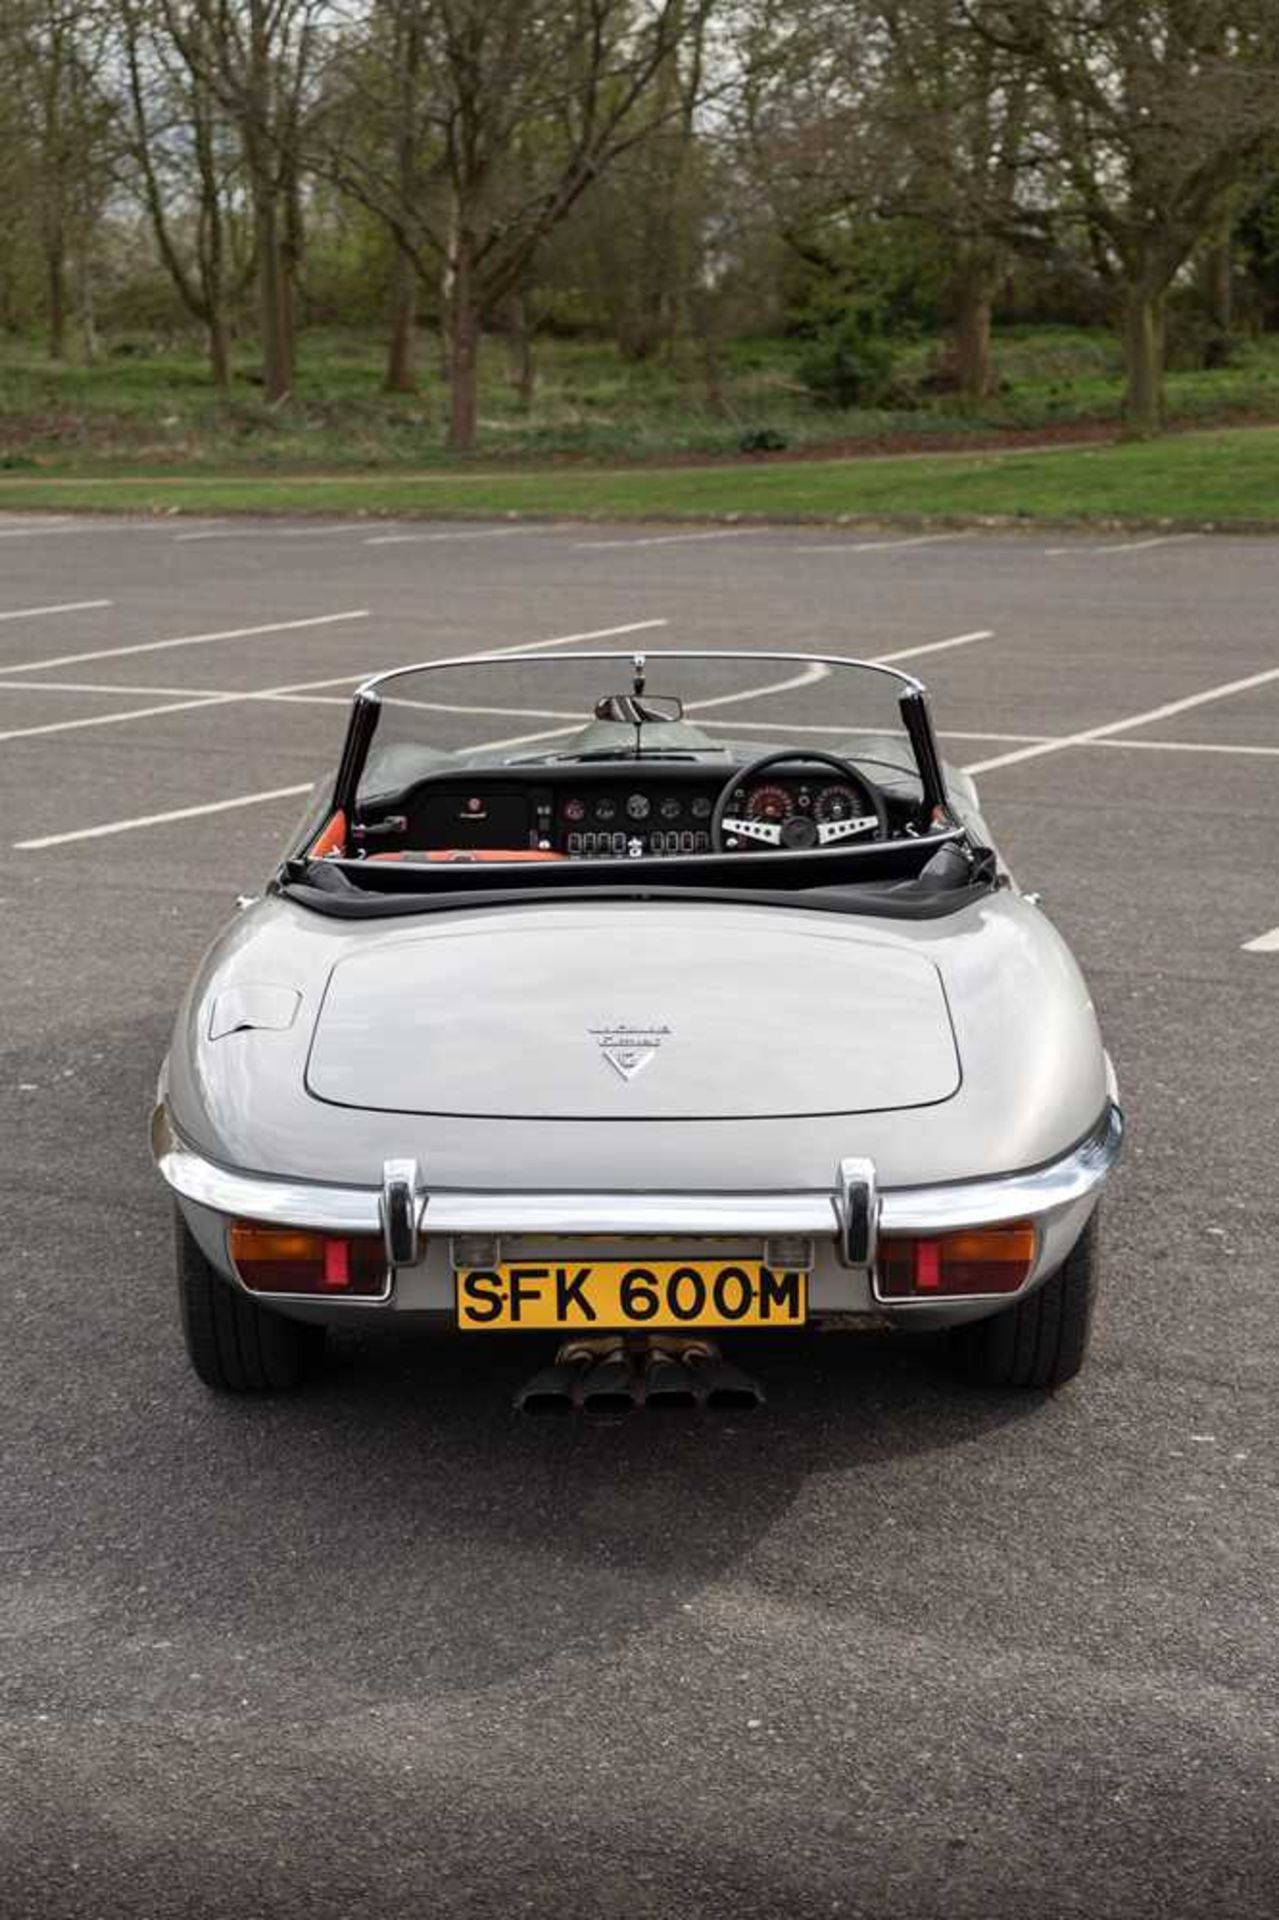 1974 Jaguar E-Type Series III V12 Roadster Only one family owner and 54,412 miles from new - Image 51 of 89